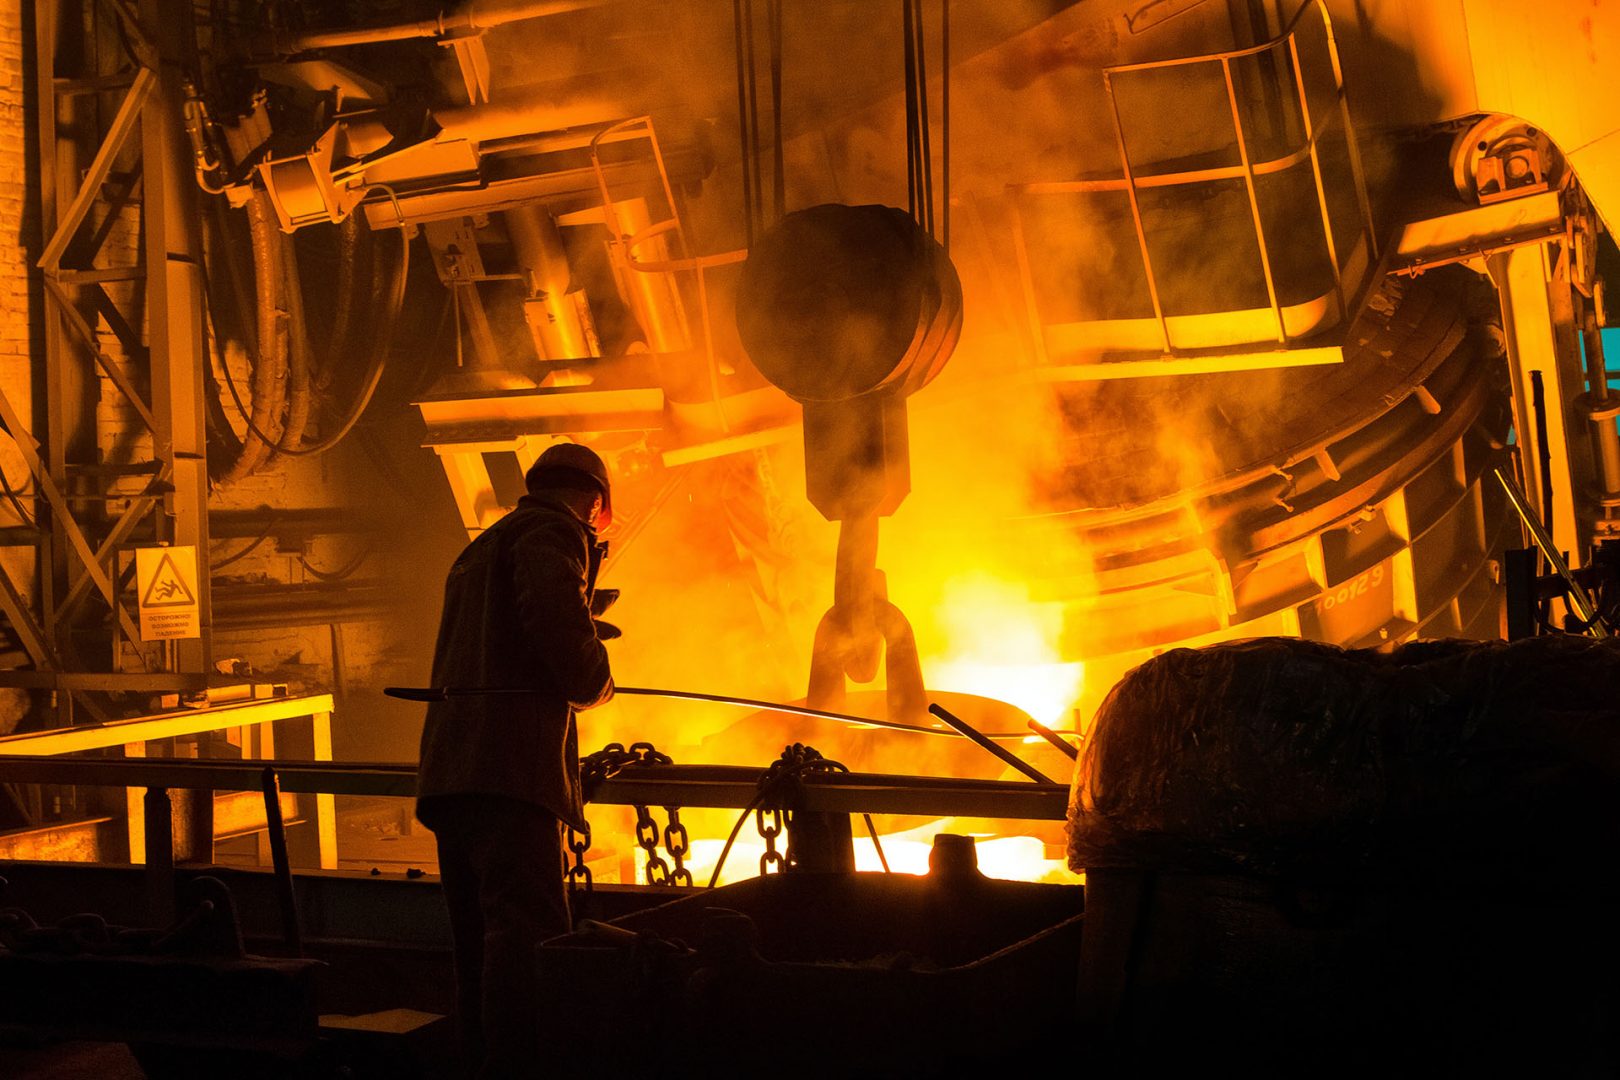 a guy pouring metals in a foundry setting